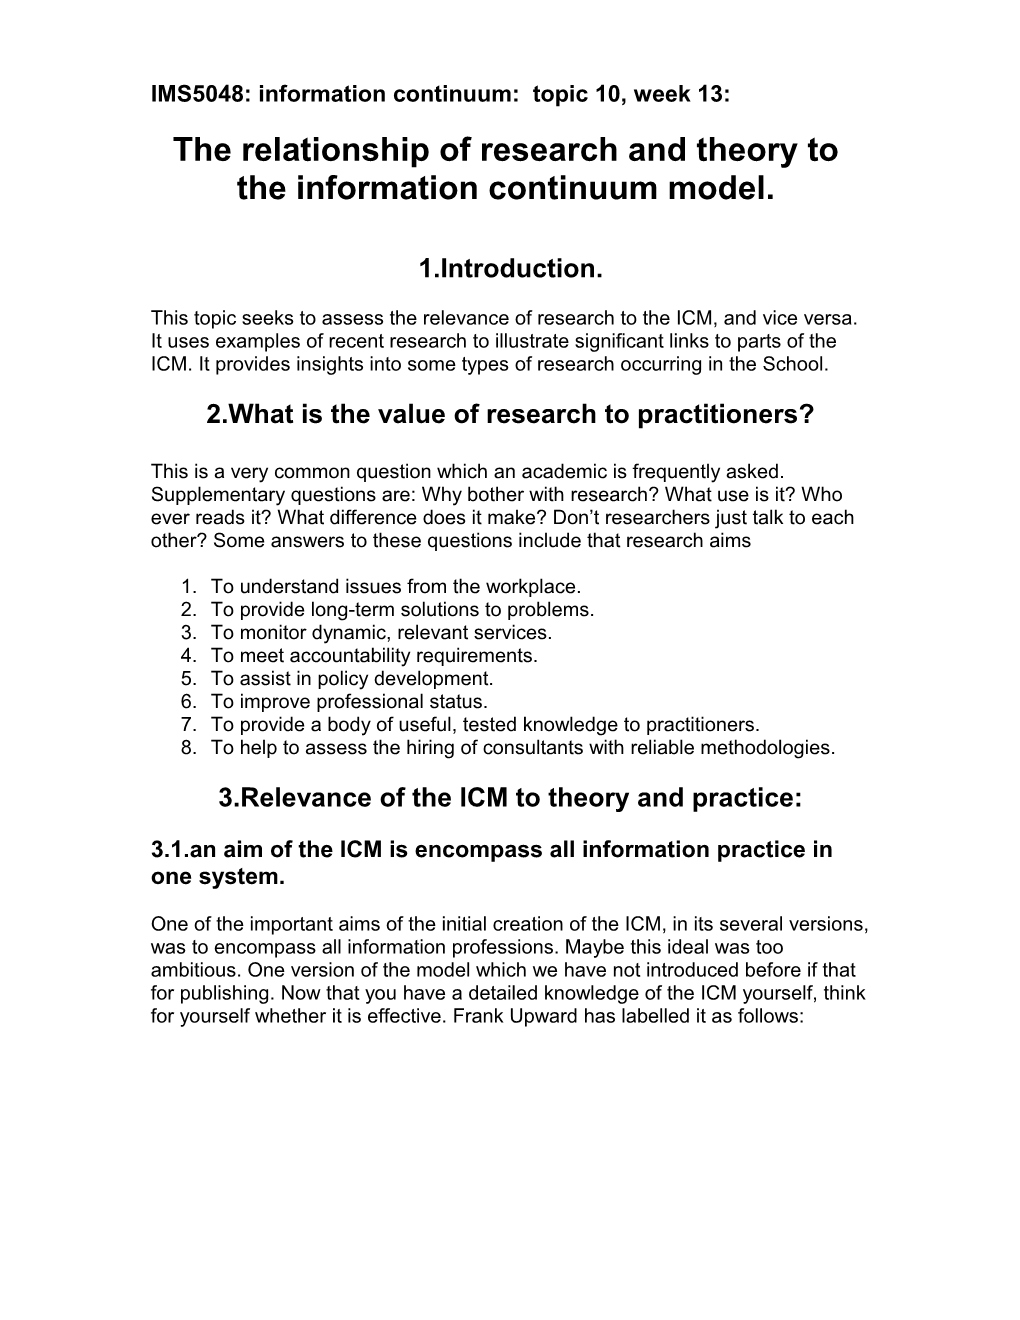 IMS5048: Information Continuum: Topic 10, Week 13